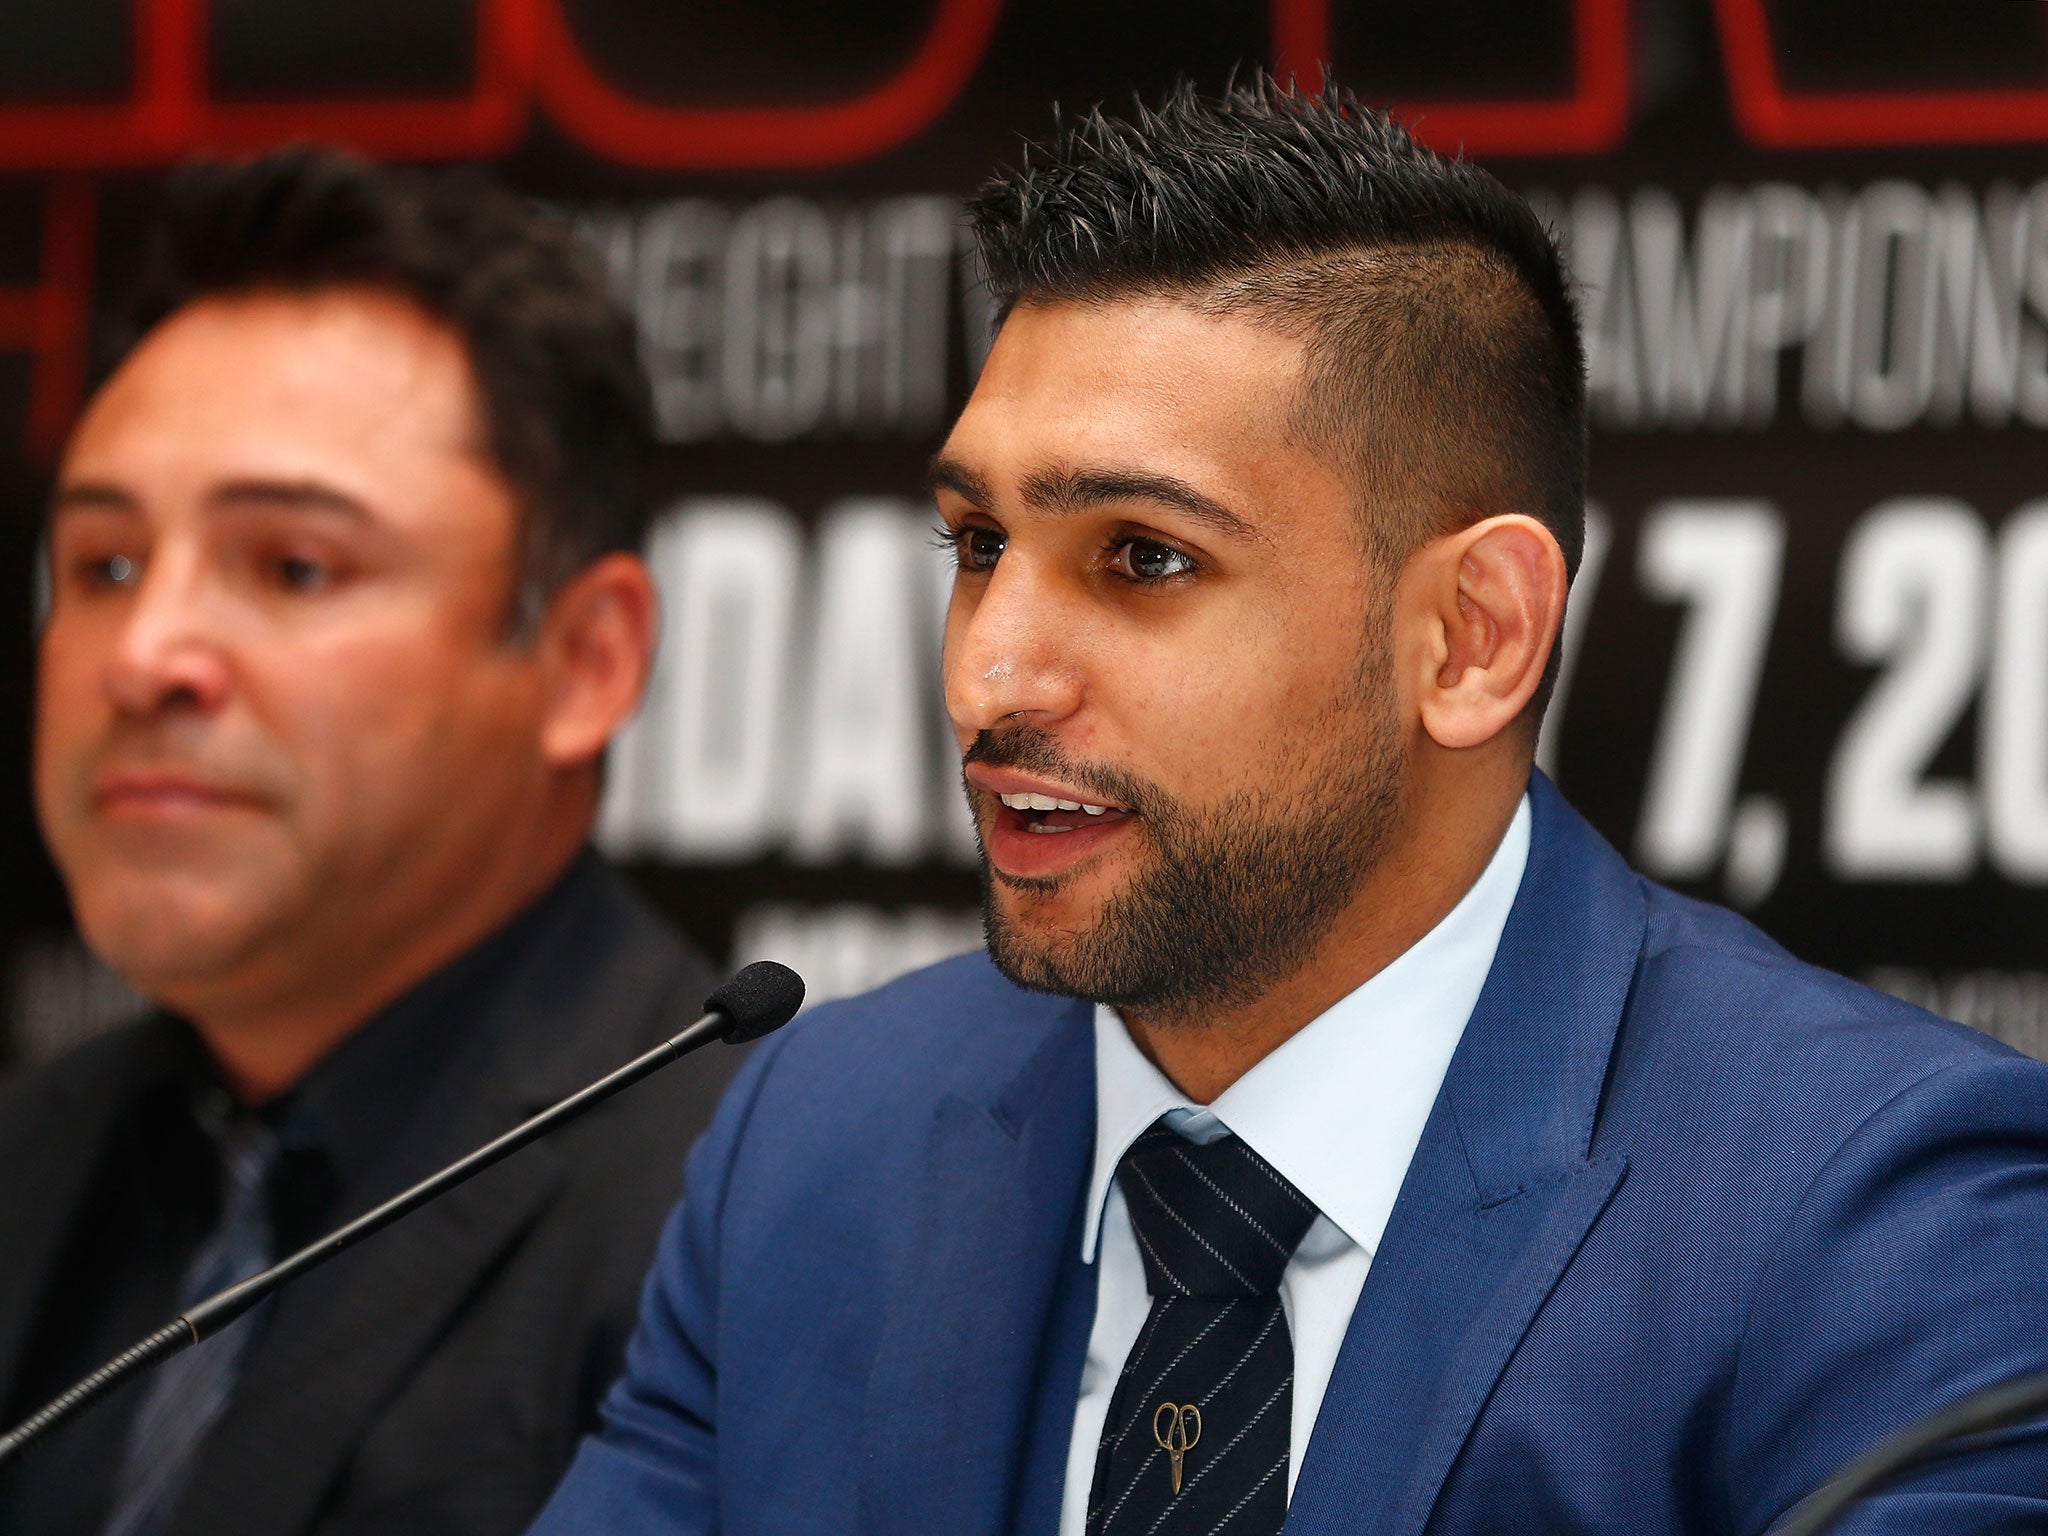 Amir Khan claimed he will be the second man to batter Kell Brook after Gennady Golovkin